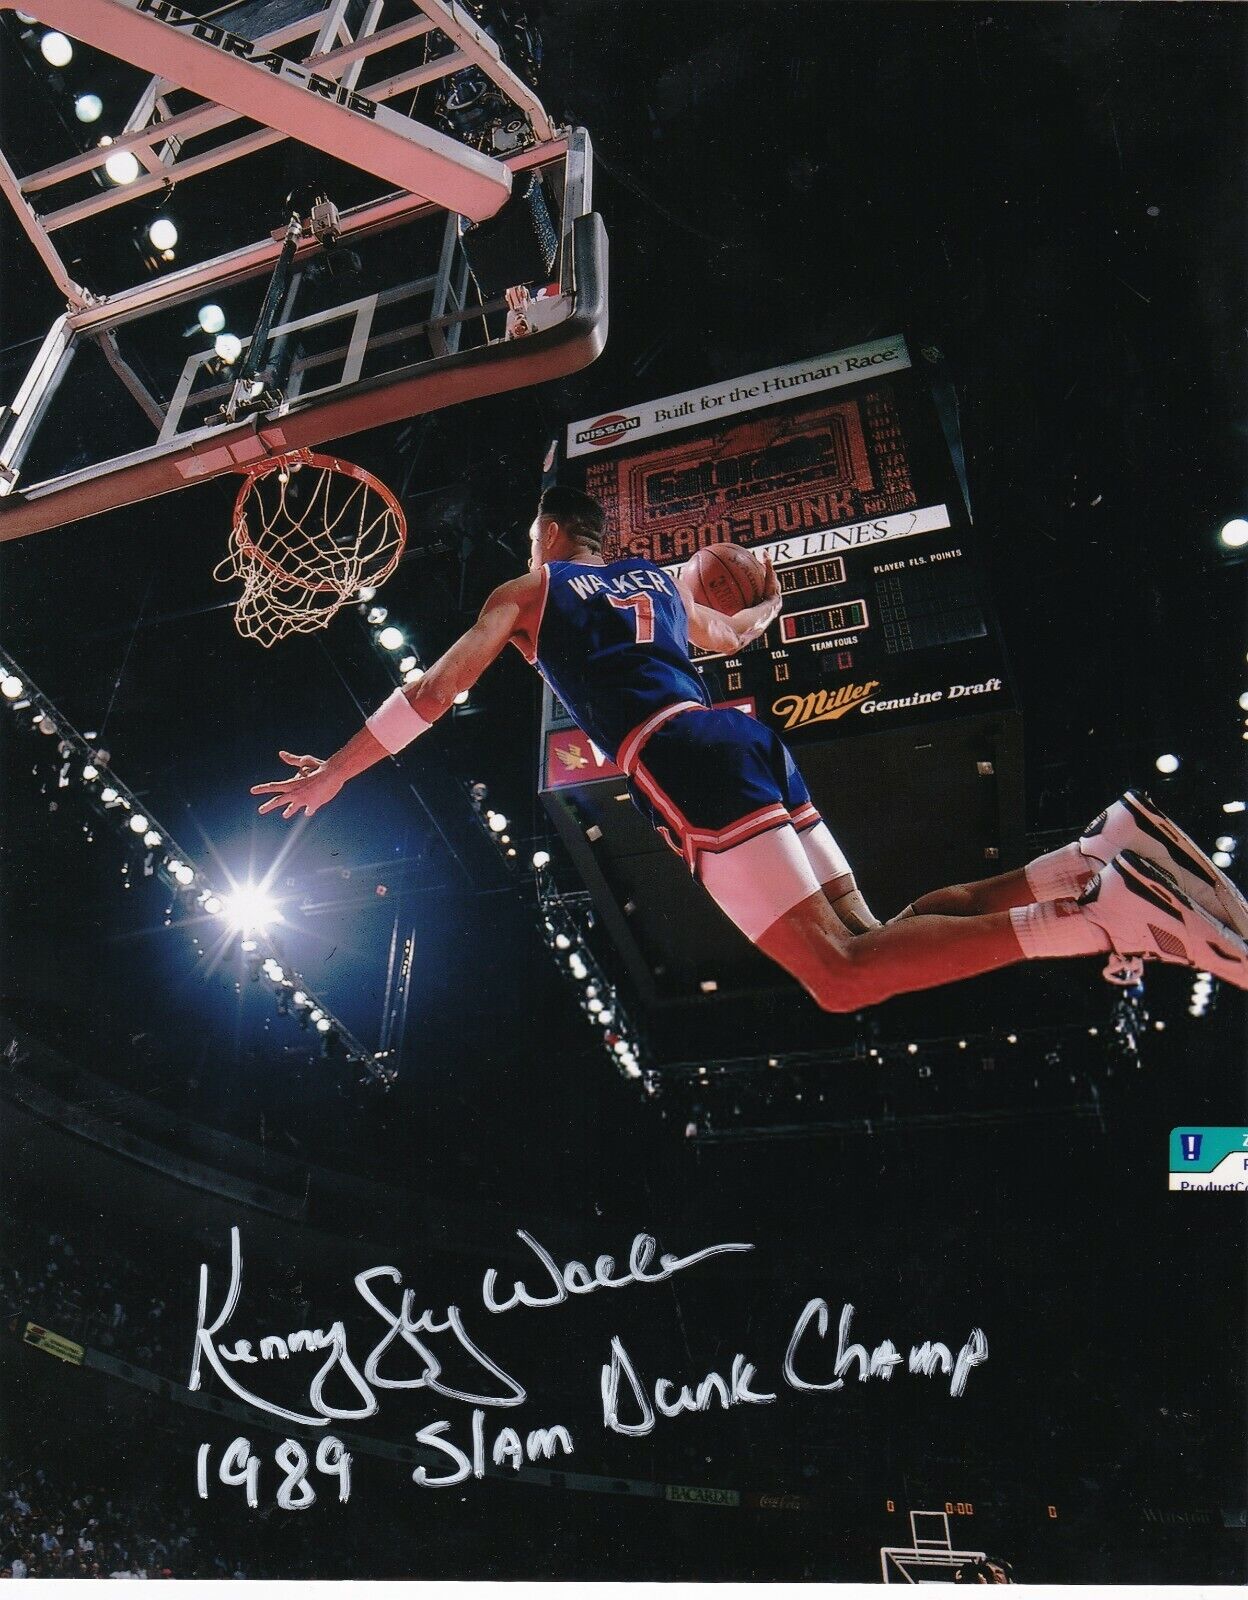 KENNY WALKER NEW YORK KNICKS 1989 SLAM DUNK CHAMP ACTION SIGNED 8x10 Photo Poster painting